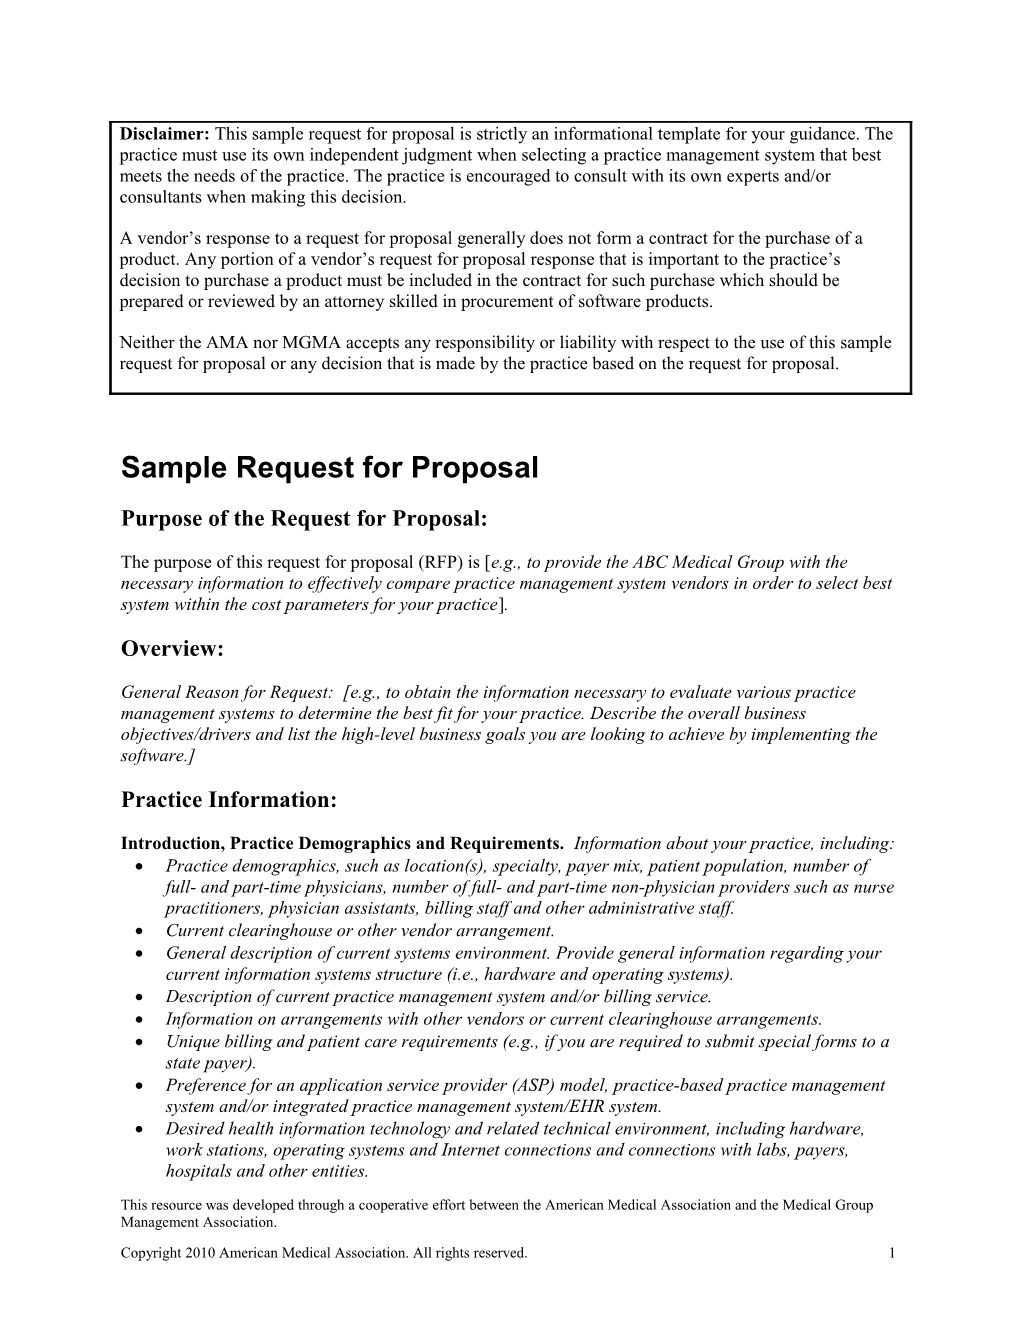 Sample Request for Proposal